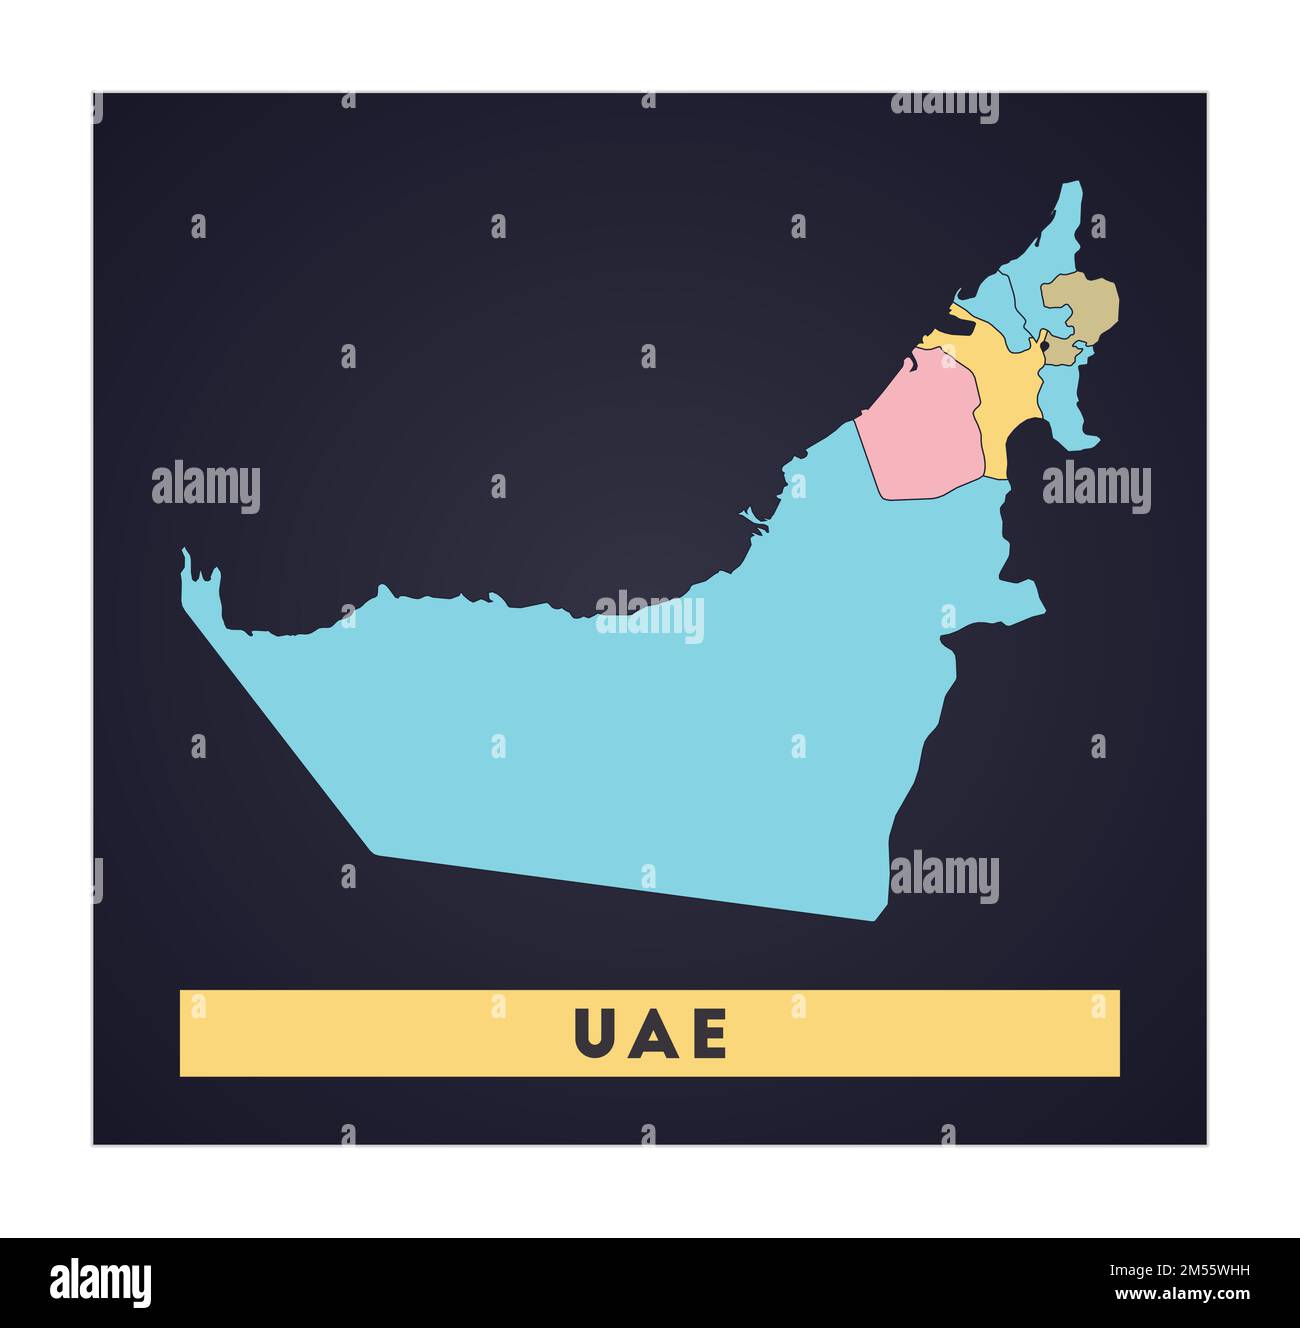 UAE map. Country poster with regions. Shape of UAE with country name. Charming vector illustration. Stock Vector